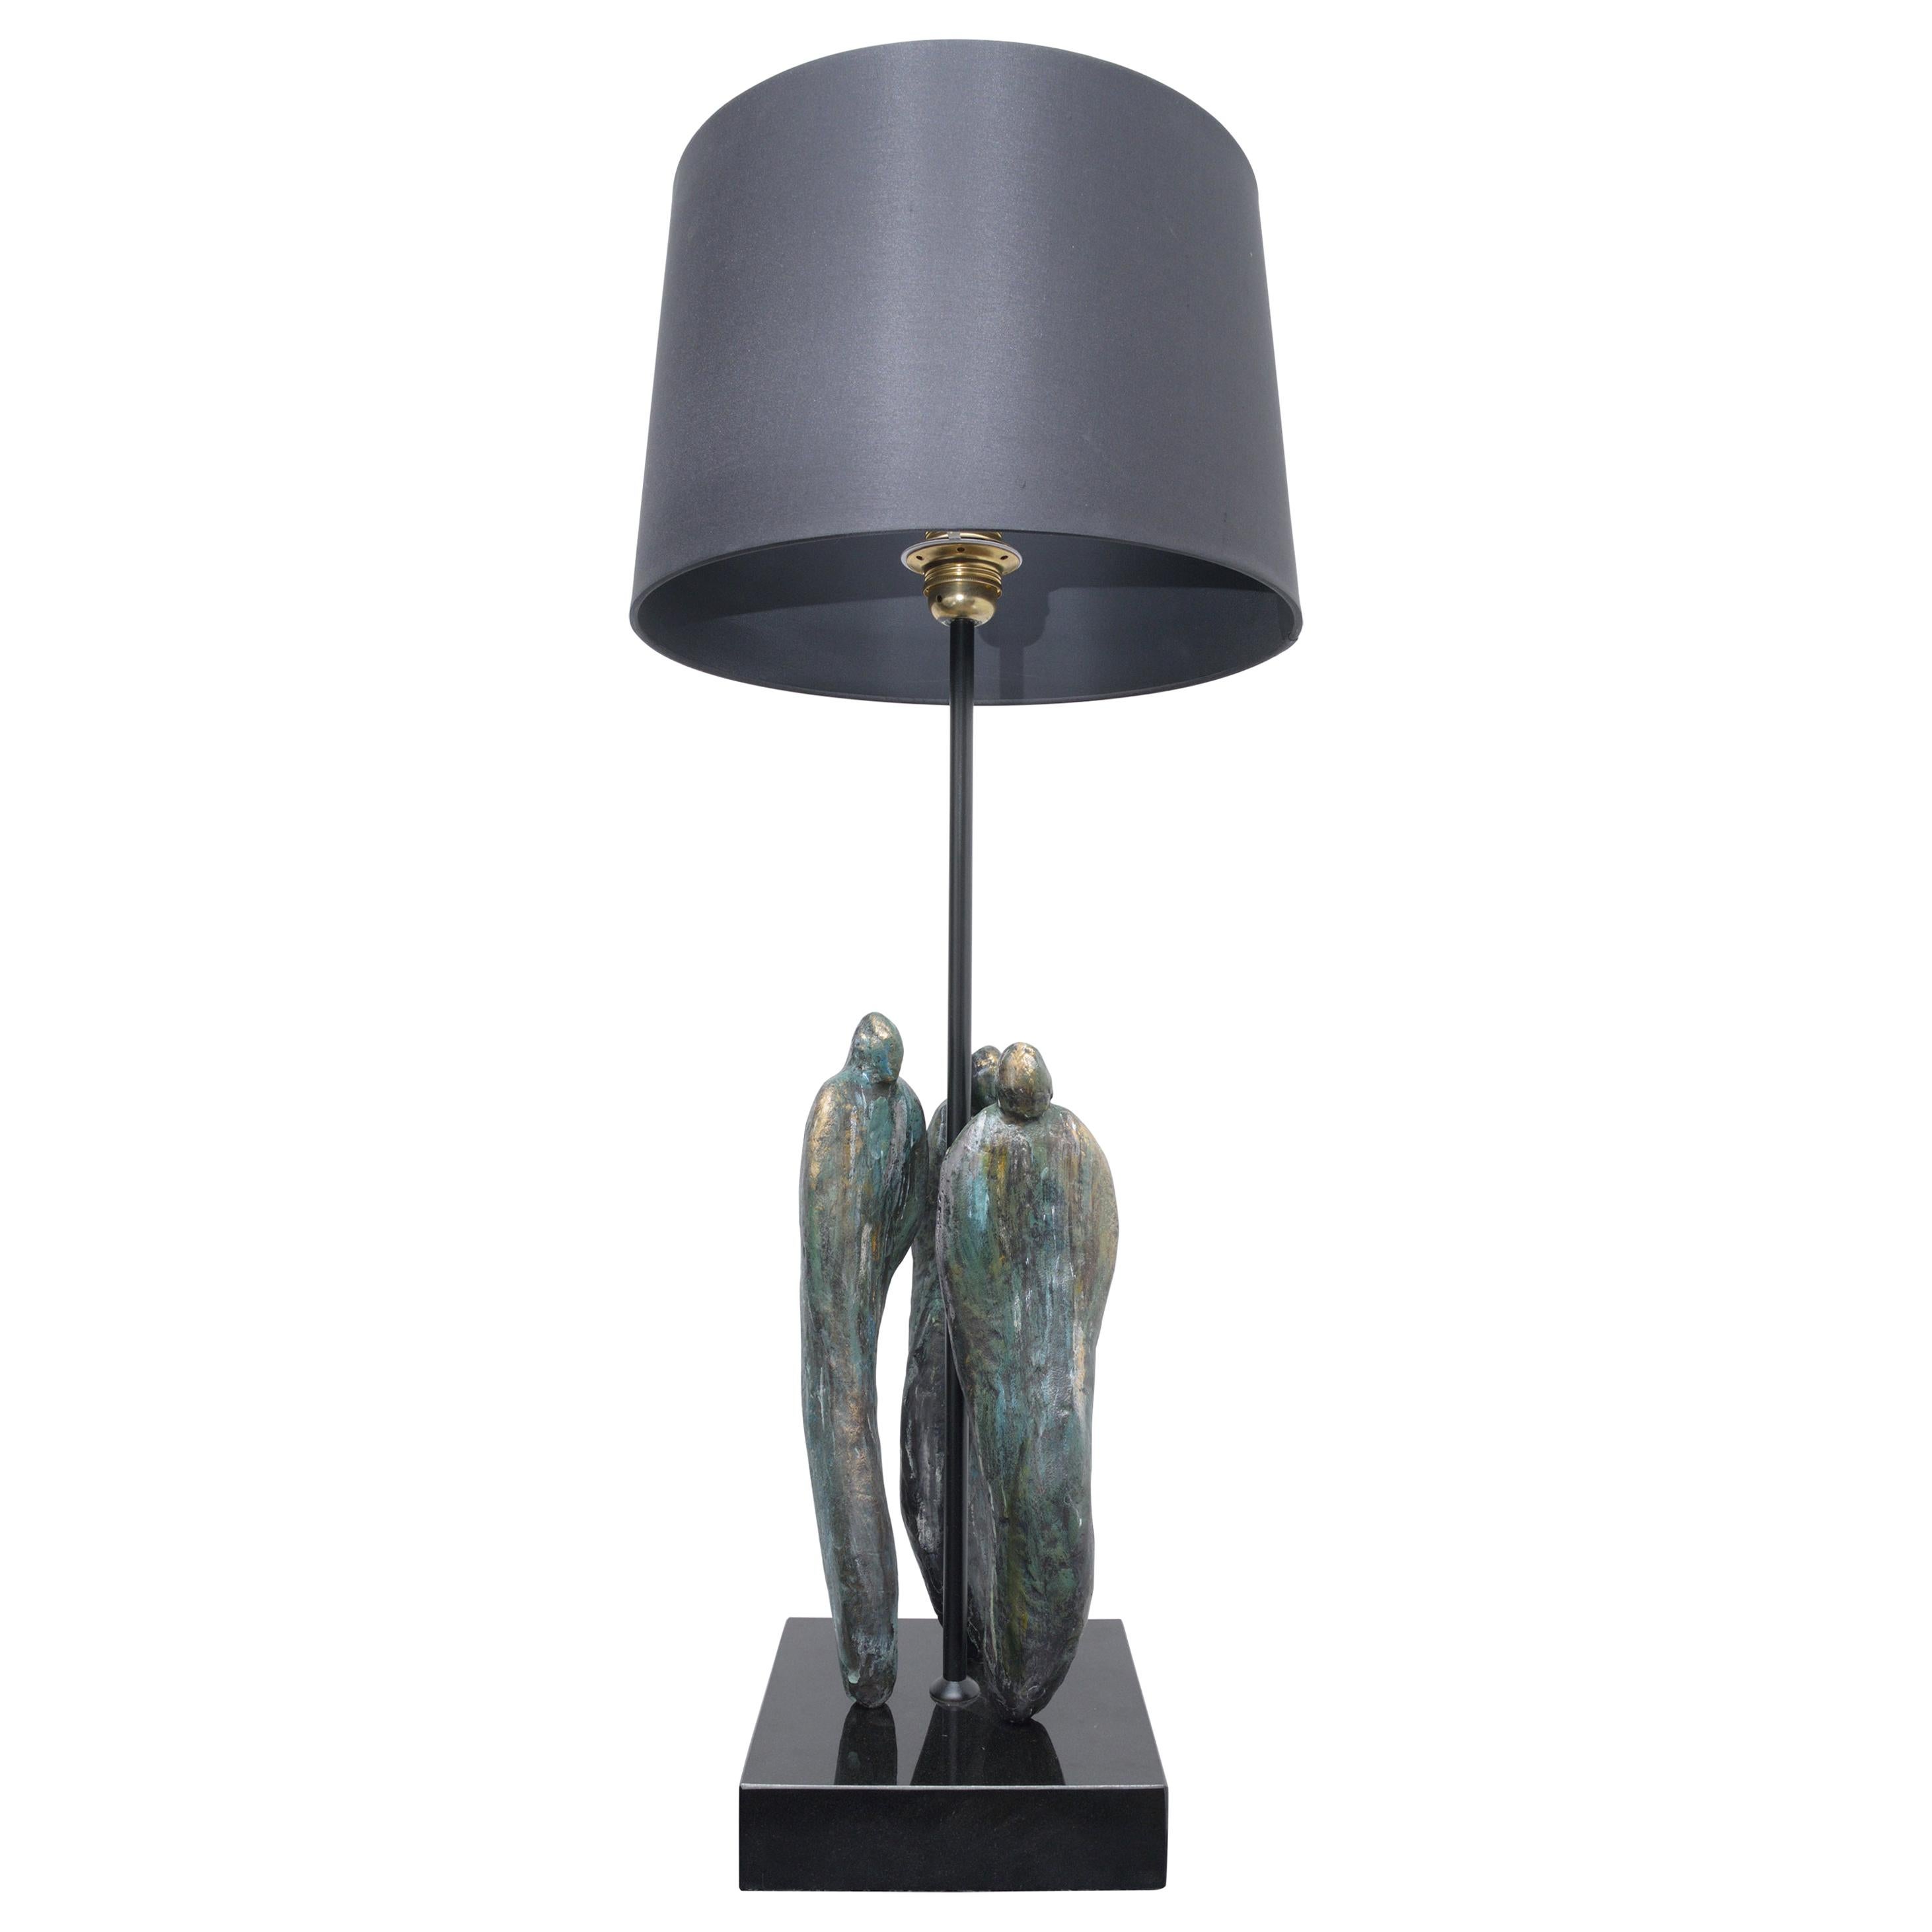 Bronze sculptural table lamp on marble. One of a kind